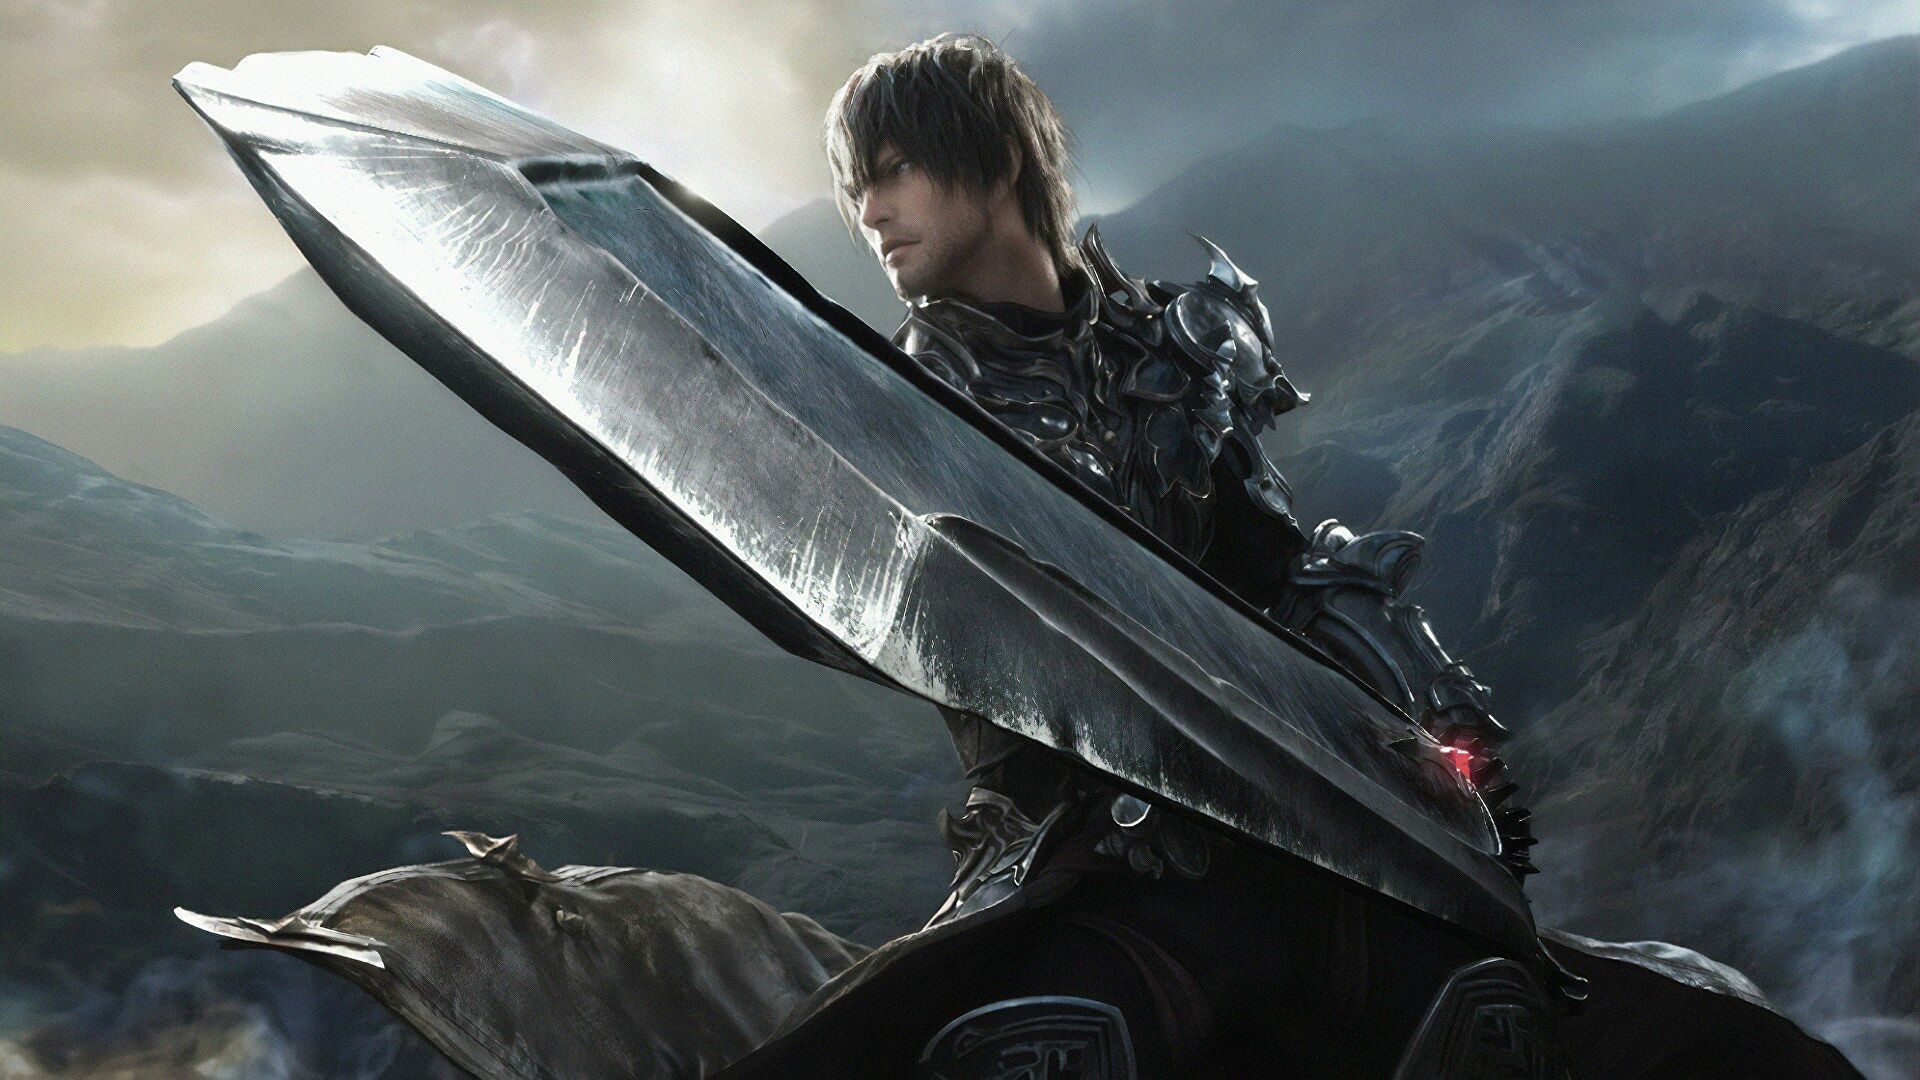 Key art from Final Fantasy 16 showing Clive Rosfield with a massive sword